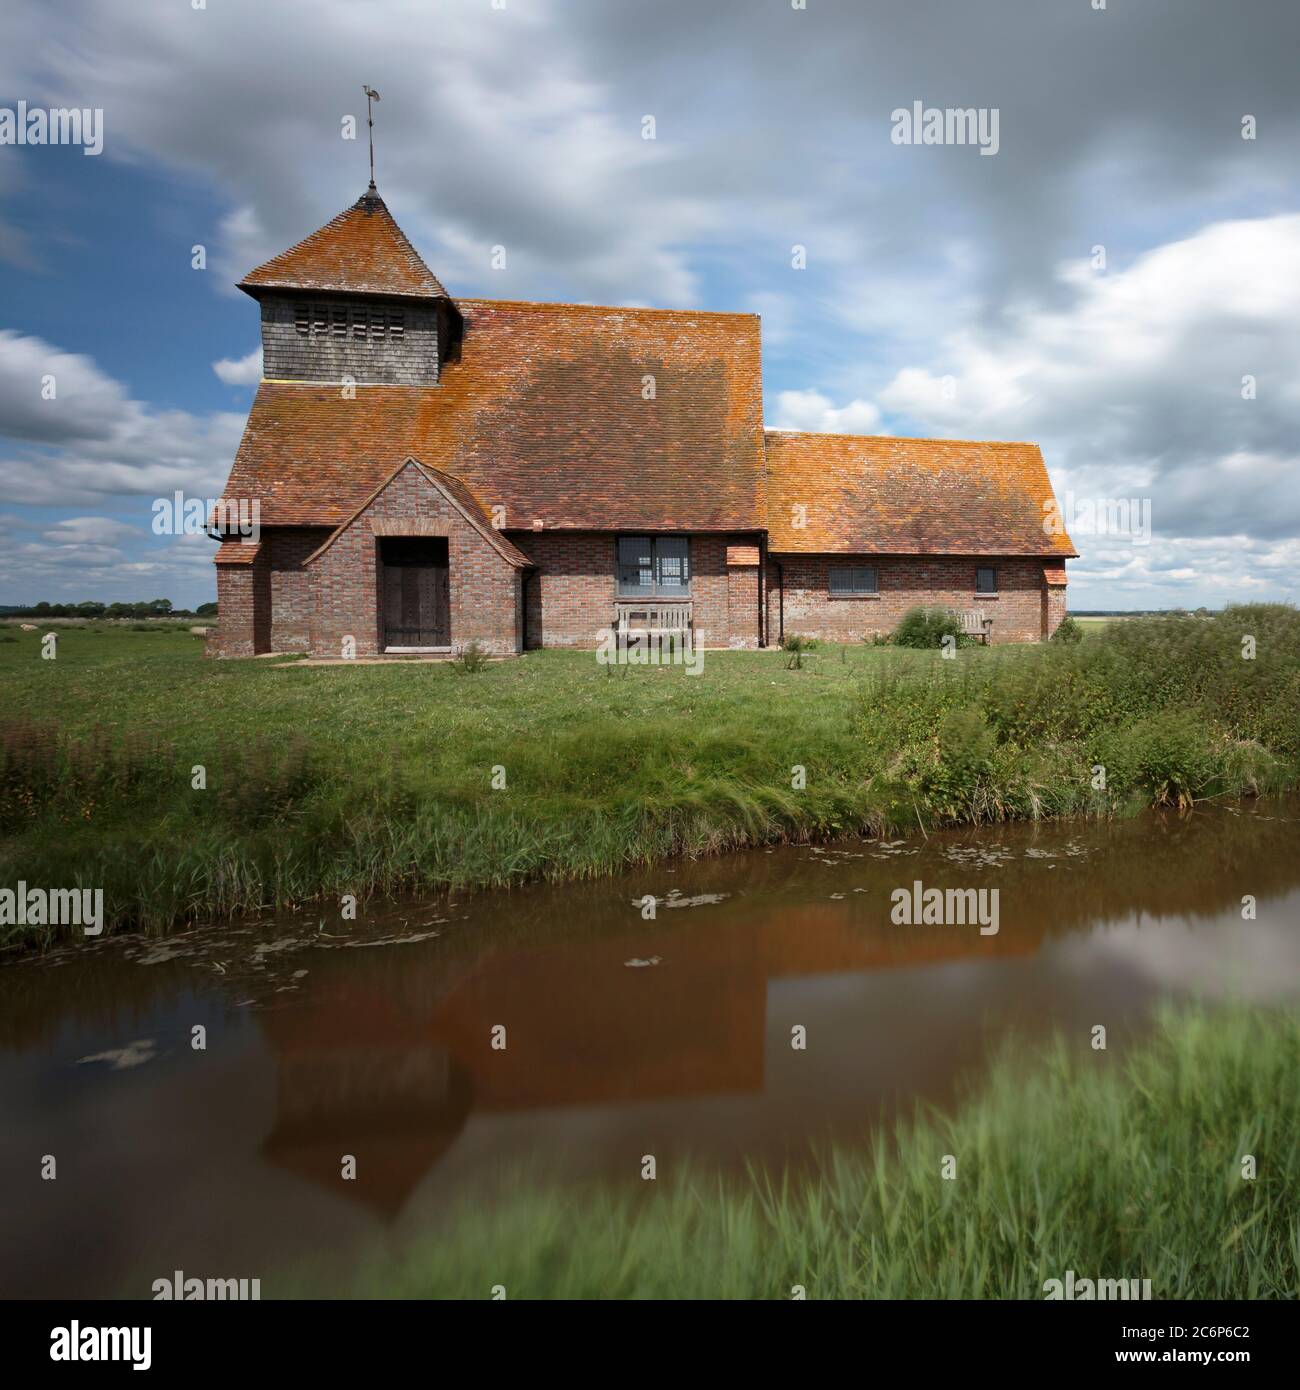 The church of St Thomas à Becket reflected in a canal near Brookland, Romney Marsh, England Stock Photo